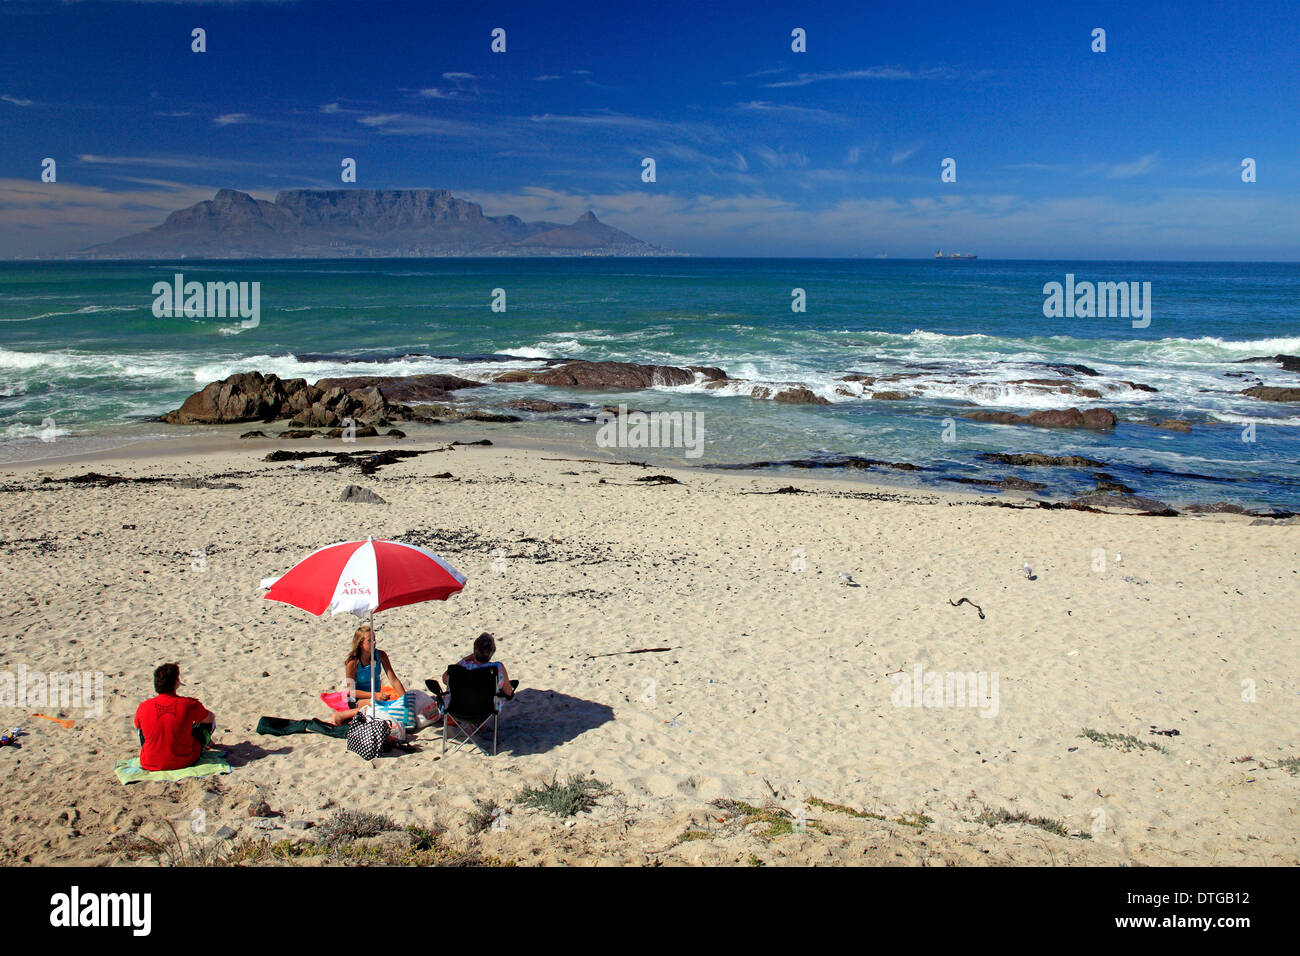 Bloubergstrand, Cape Town, South Africa / Table Mountain, Table Bay, sunshade Stock Photo